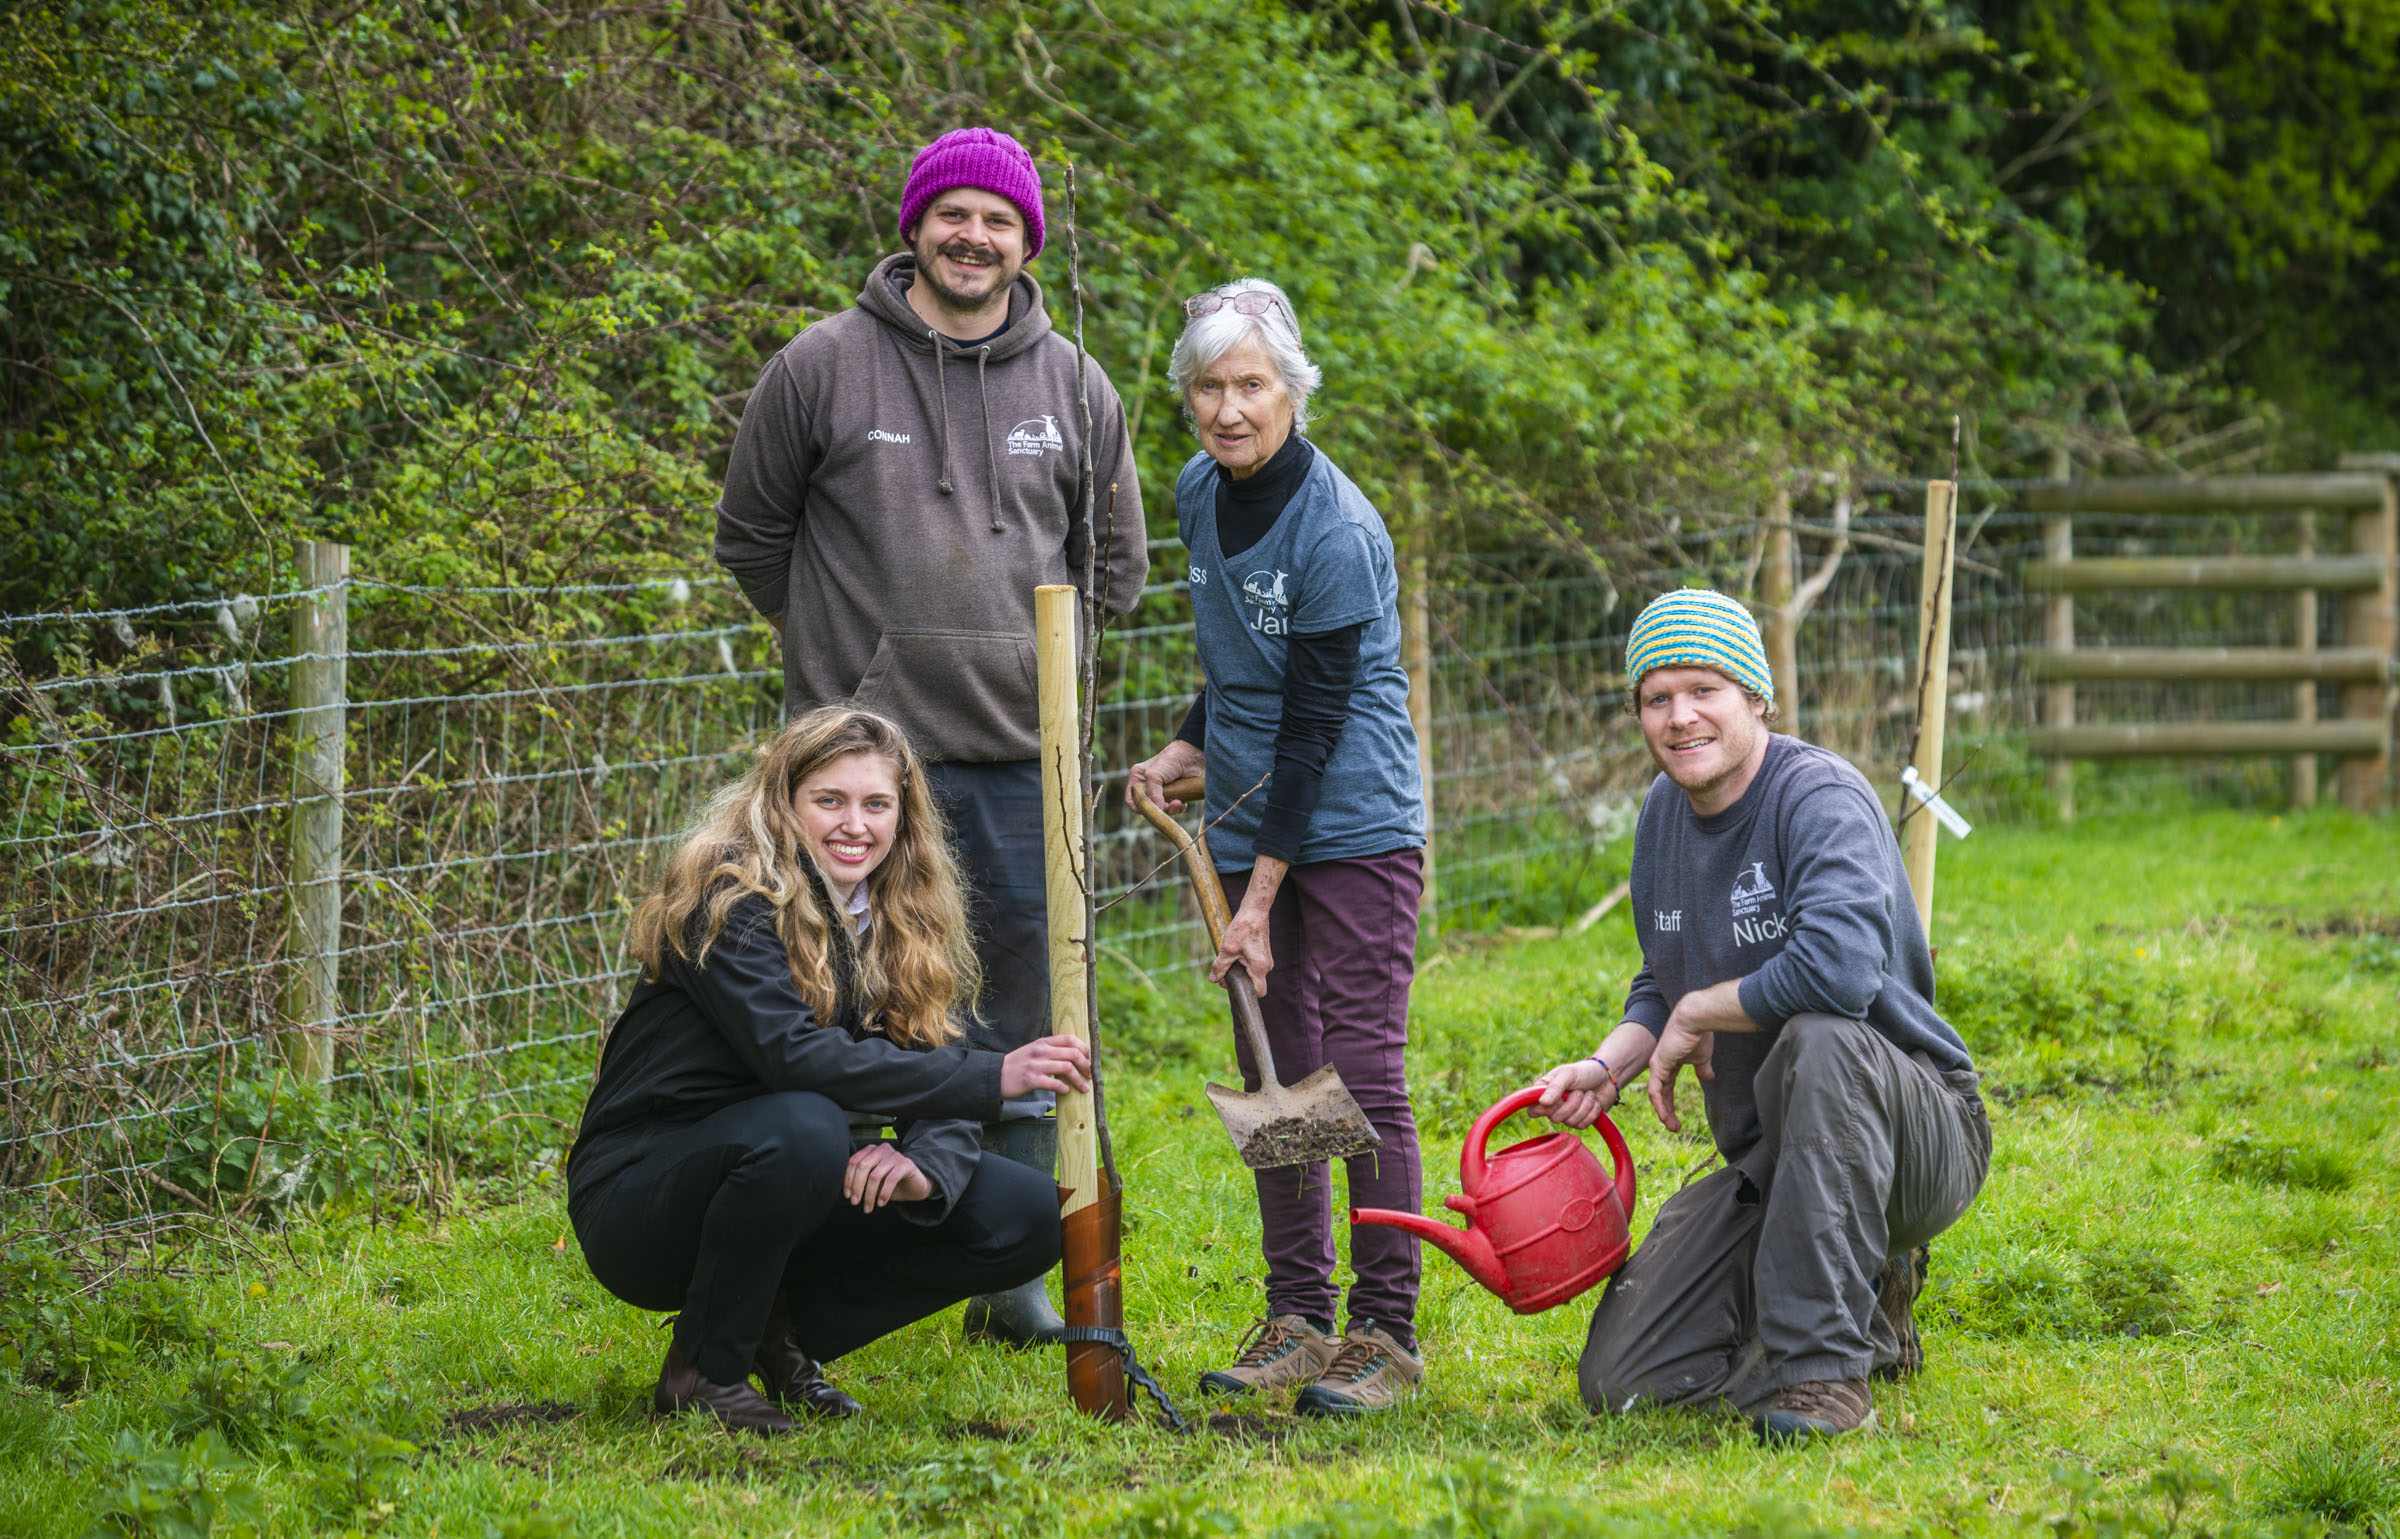 We’ve donated apple trees to 50 community groups across the UK